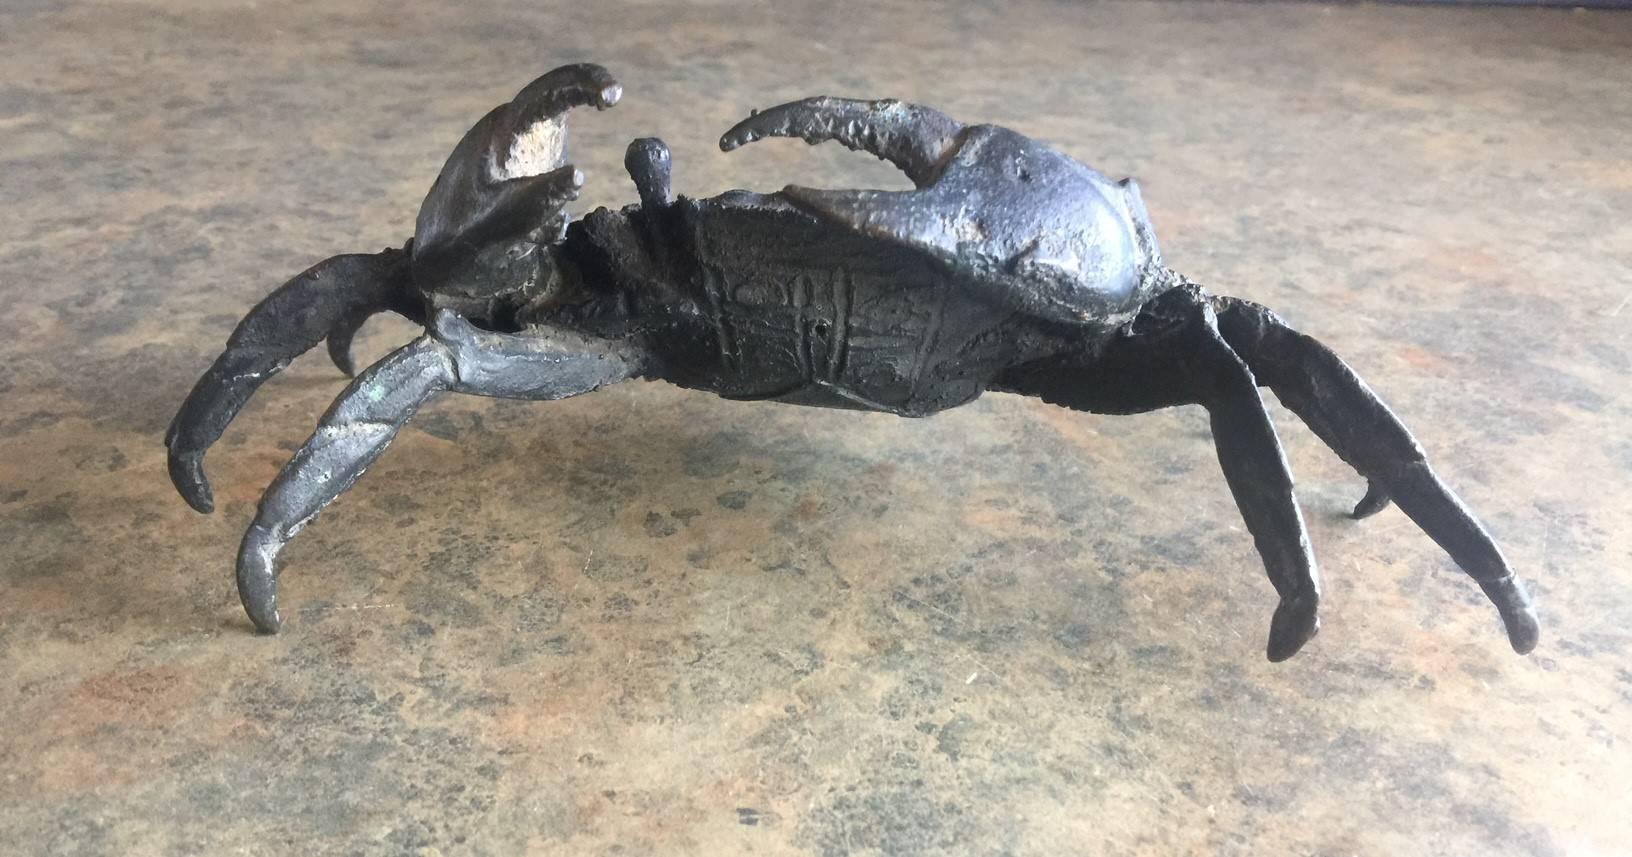 A well detailed and patinated articulated bronze crab sculpture. The piece has an Asian flair to it and may be vintage Chinese.